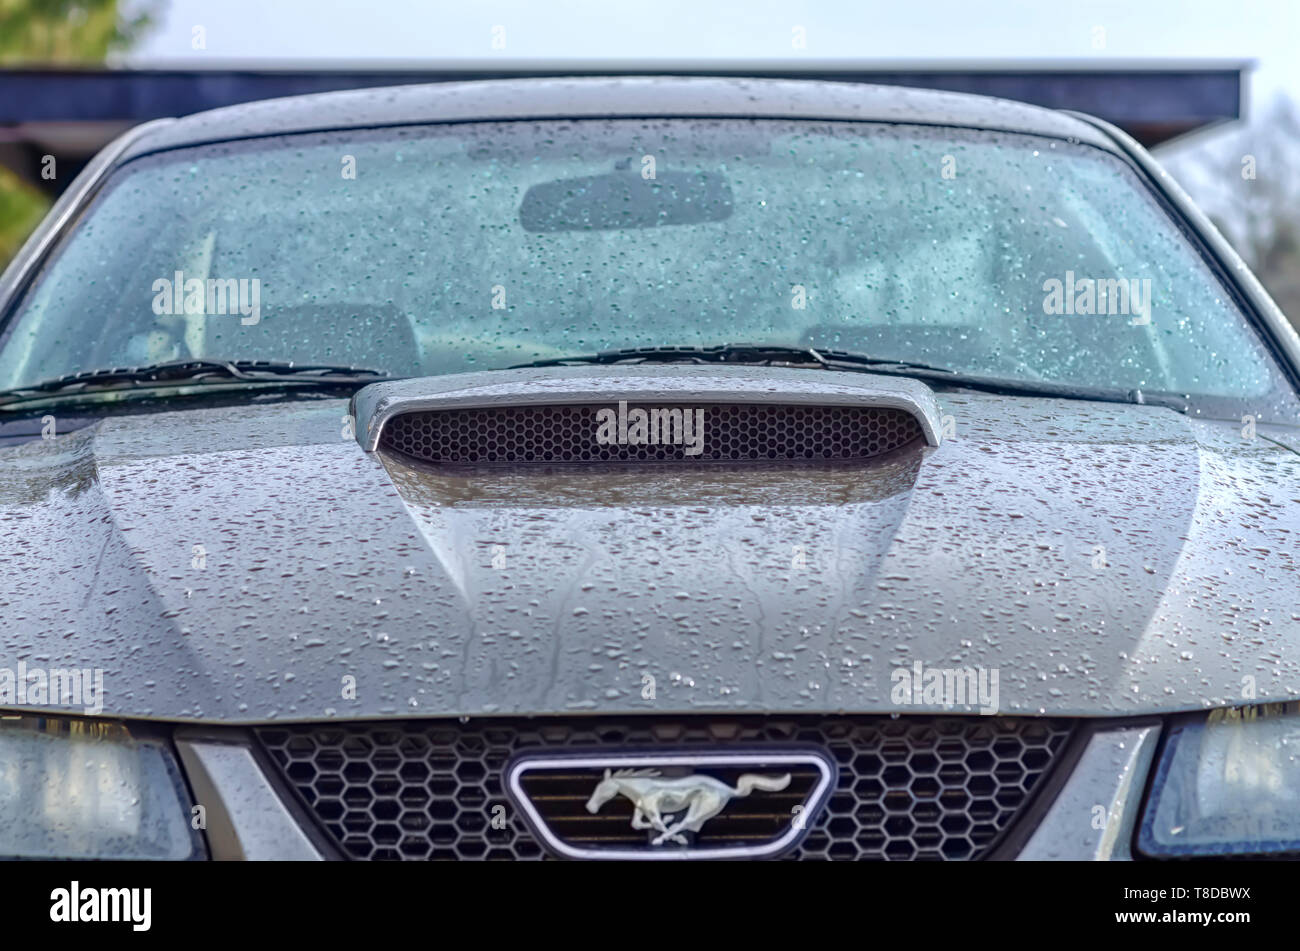 Rain water dripping off a 2001 Ford Mustang GT Coupe after a summer storm. Light reflecting off tiny water droplets are also visible in the image. Stock Photo